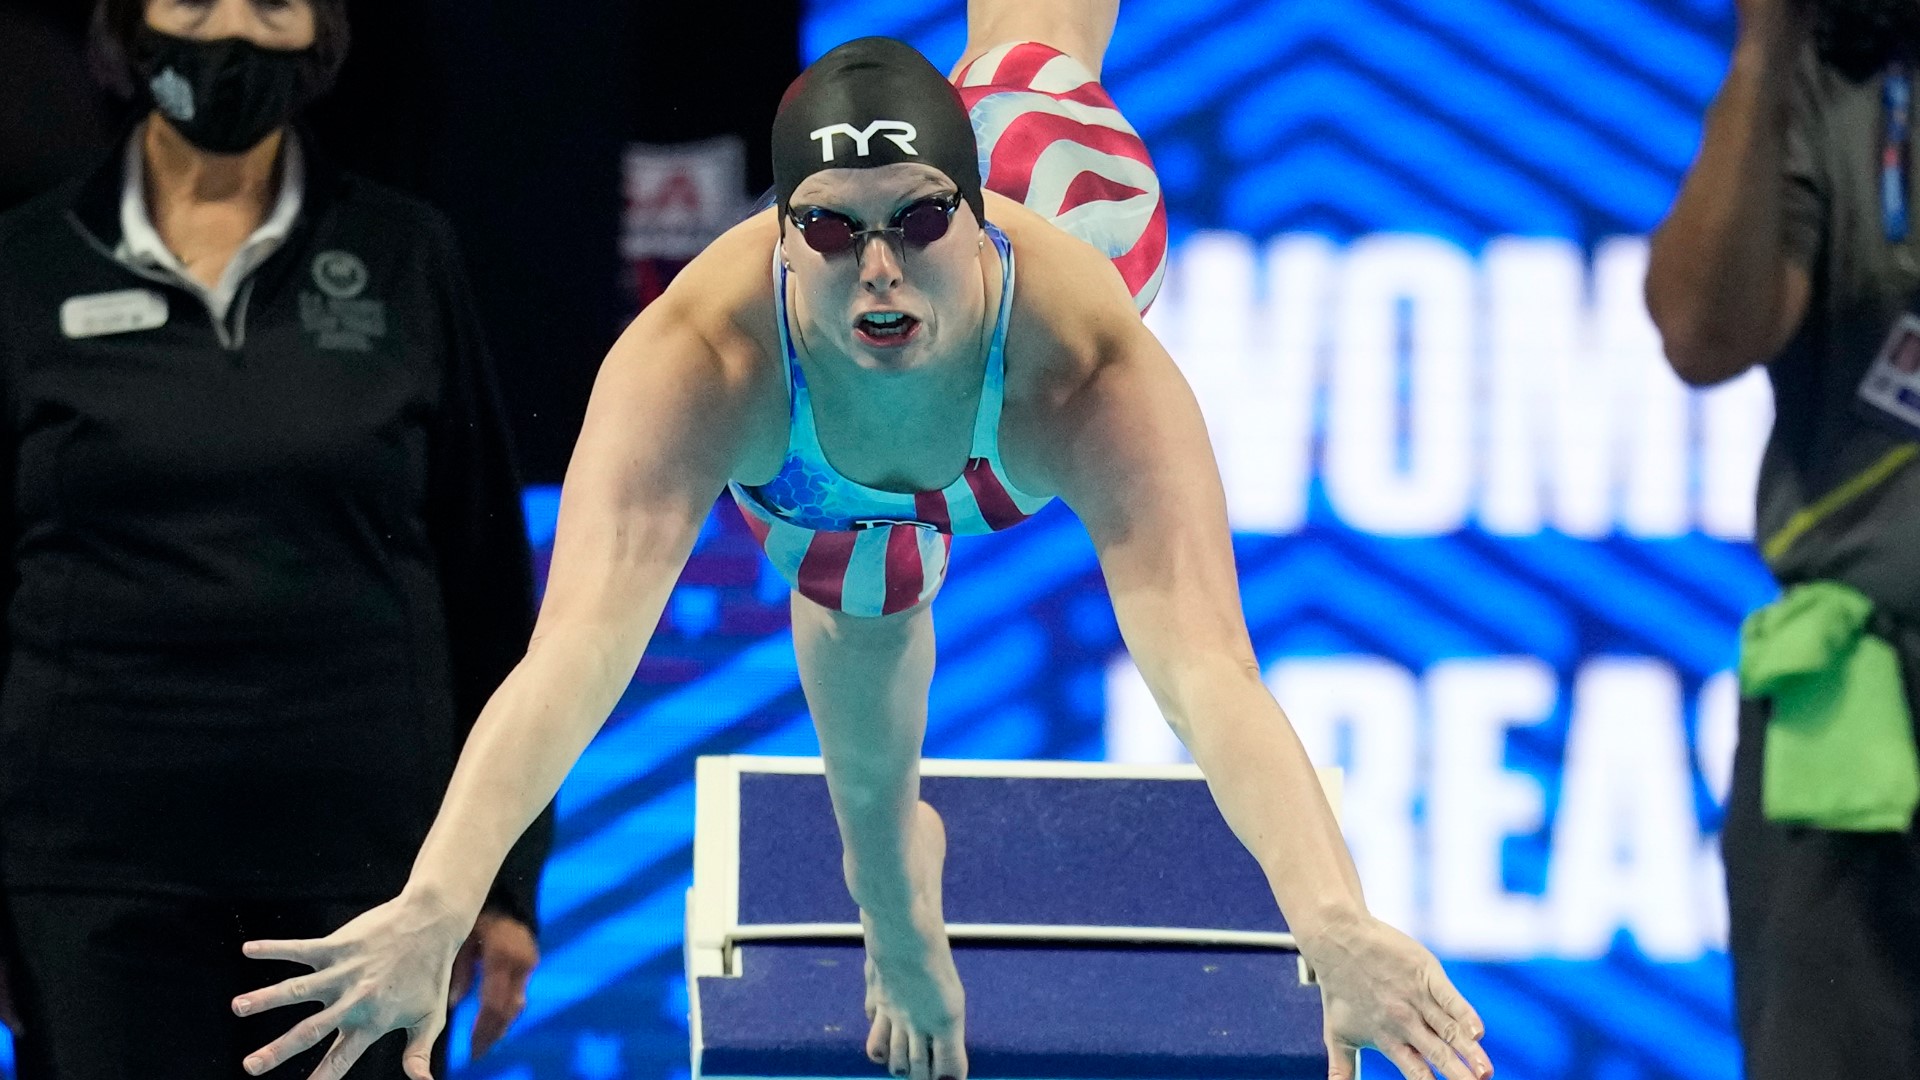 Lilly King doesn't mind being a villain when it comes to swimming, because as she points out, "being feared is empowering."